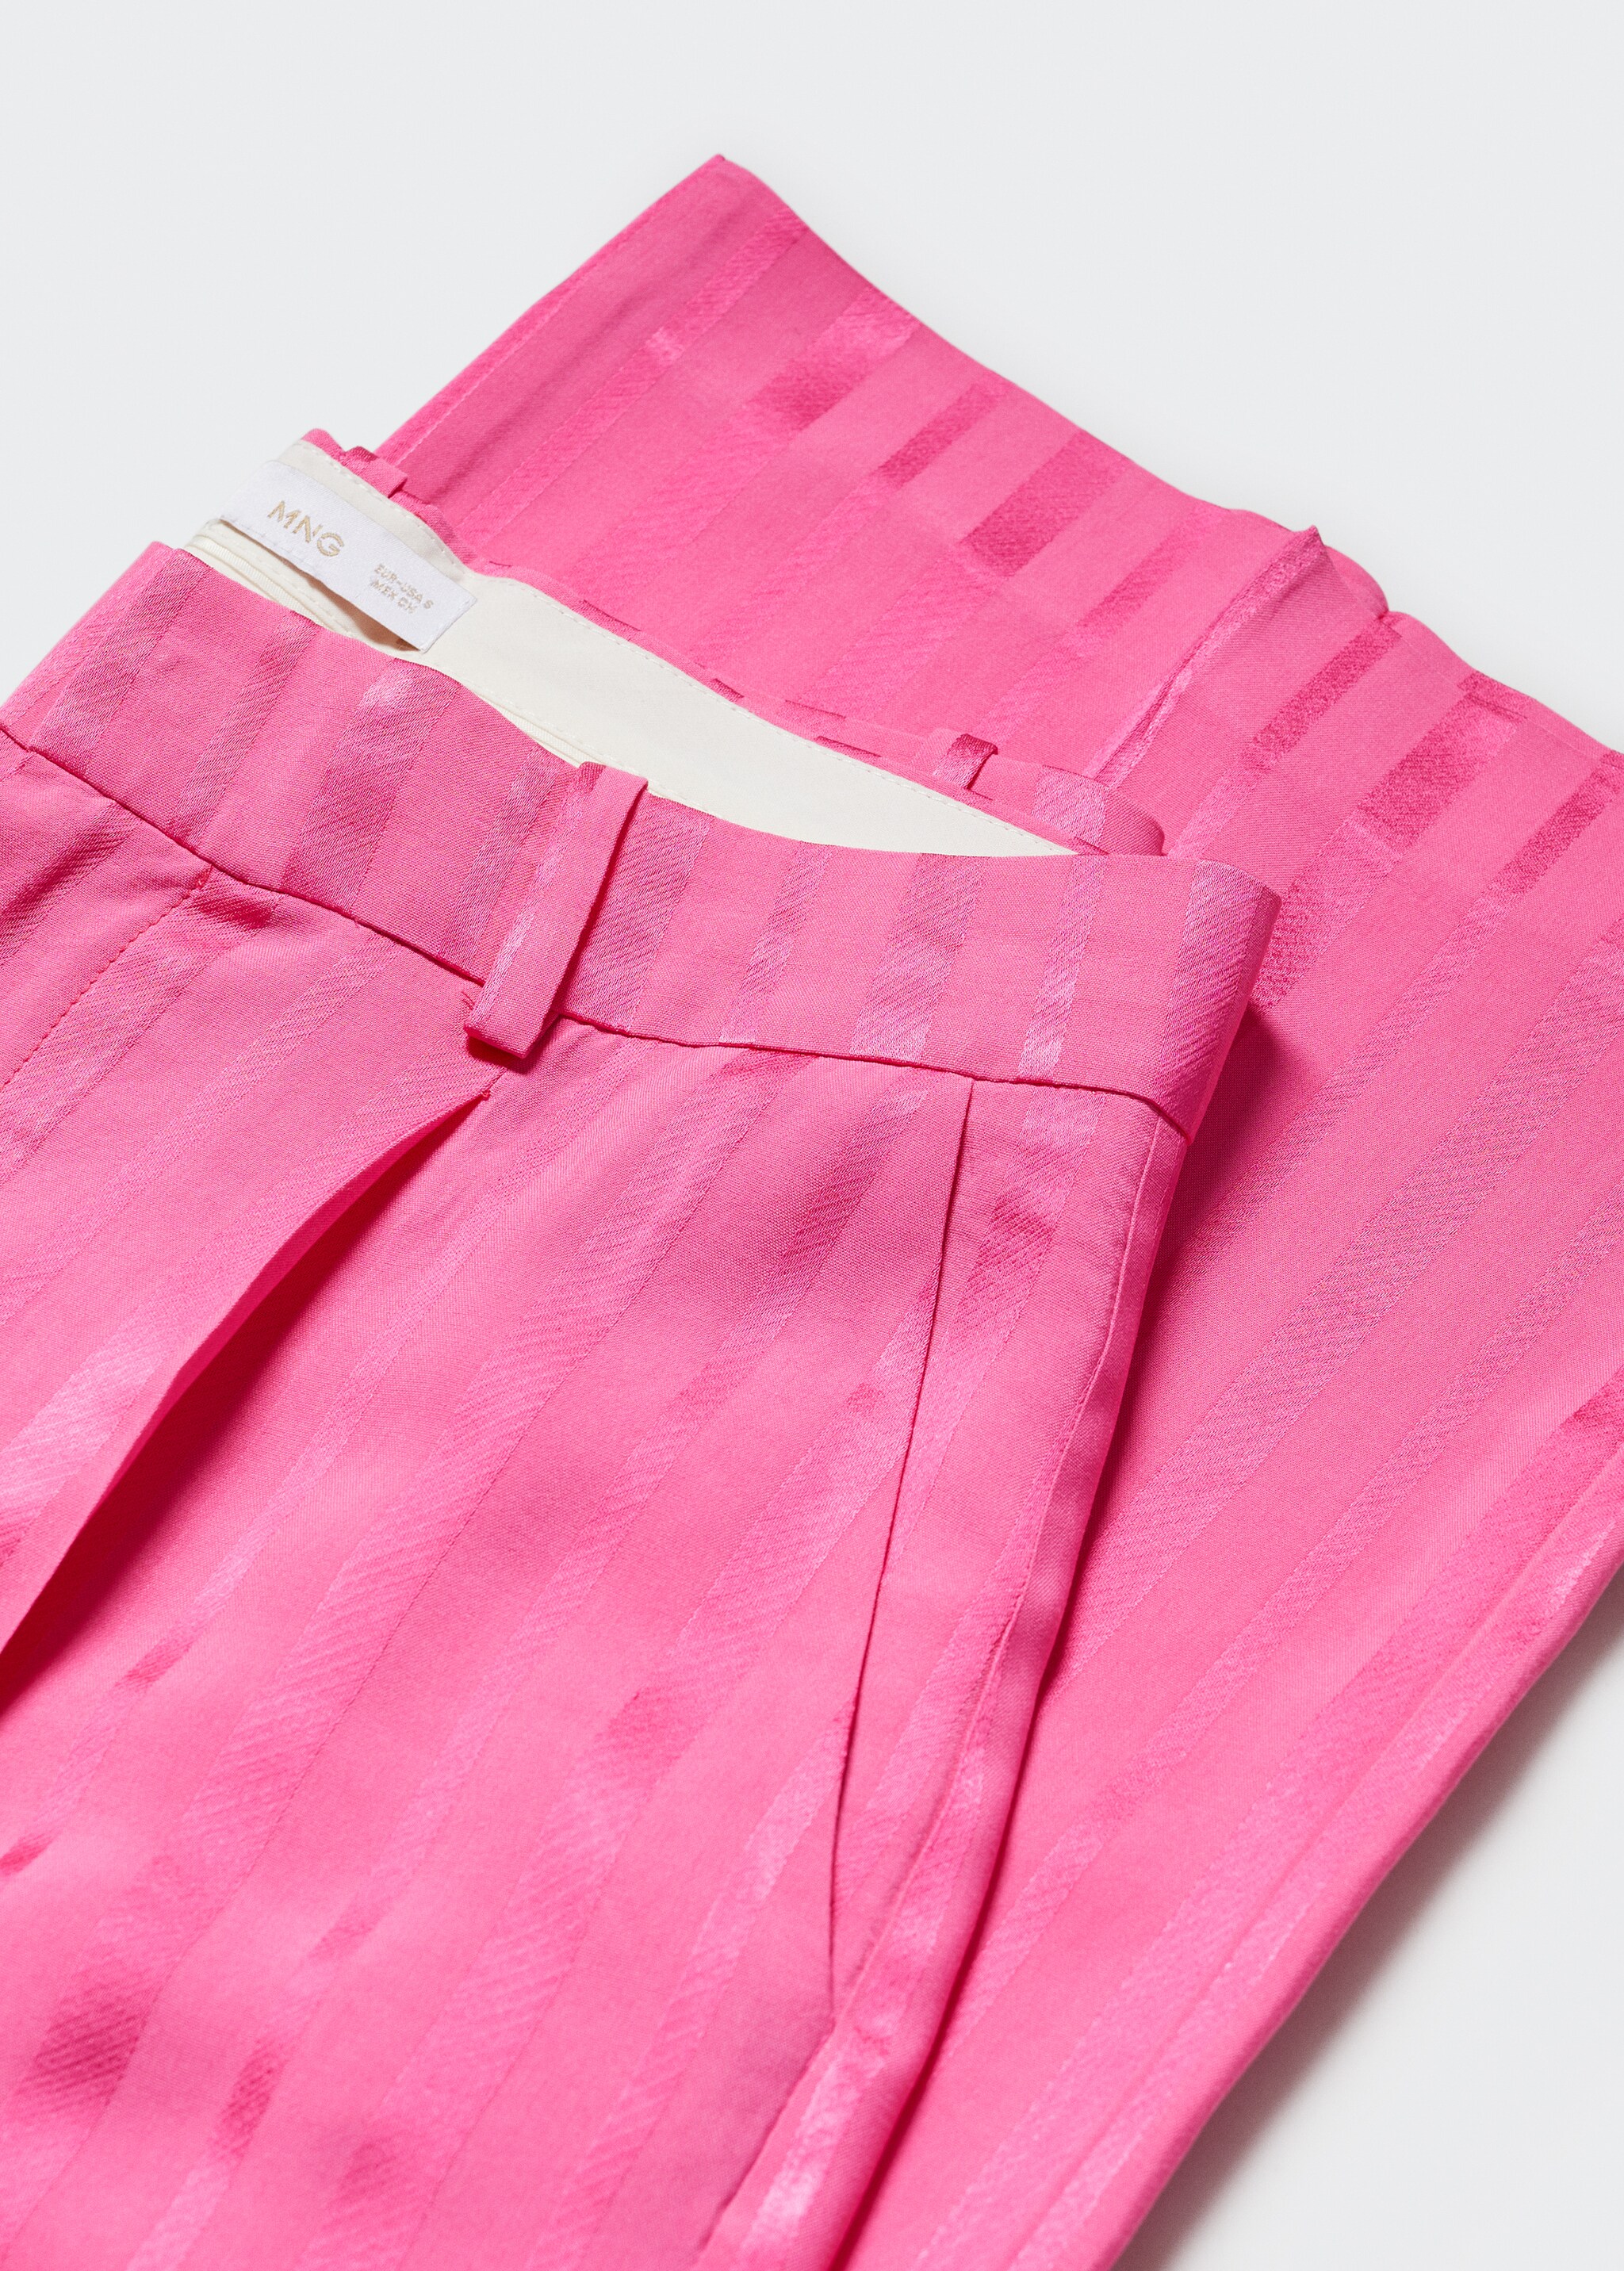 Pants with satin stripe detail - Details of the article 8